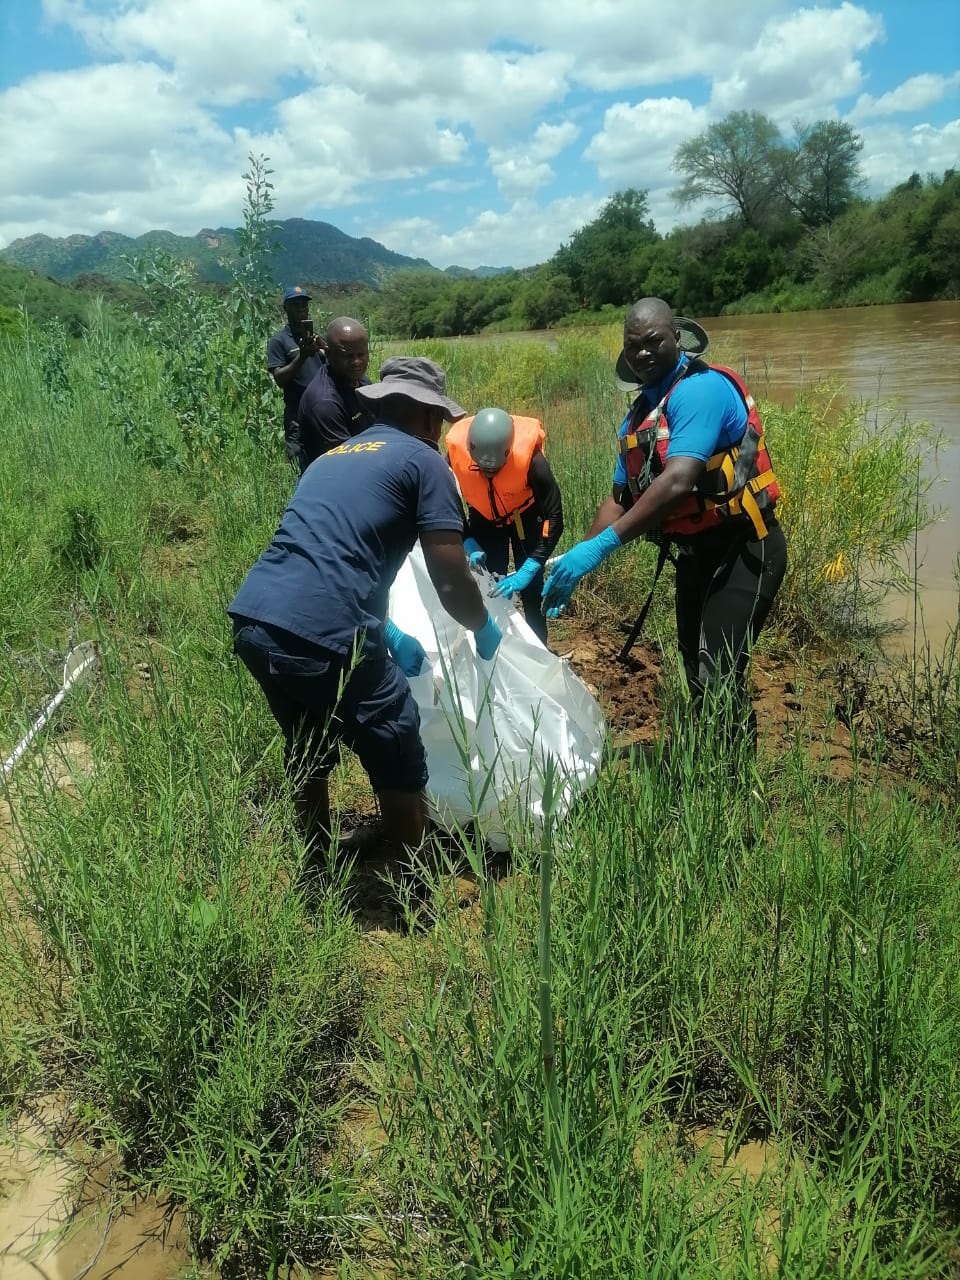 The police search and rescue team recovered one of the bodies. Bongani Durumani.